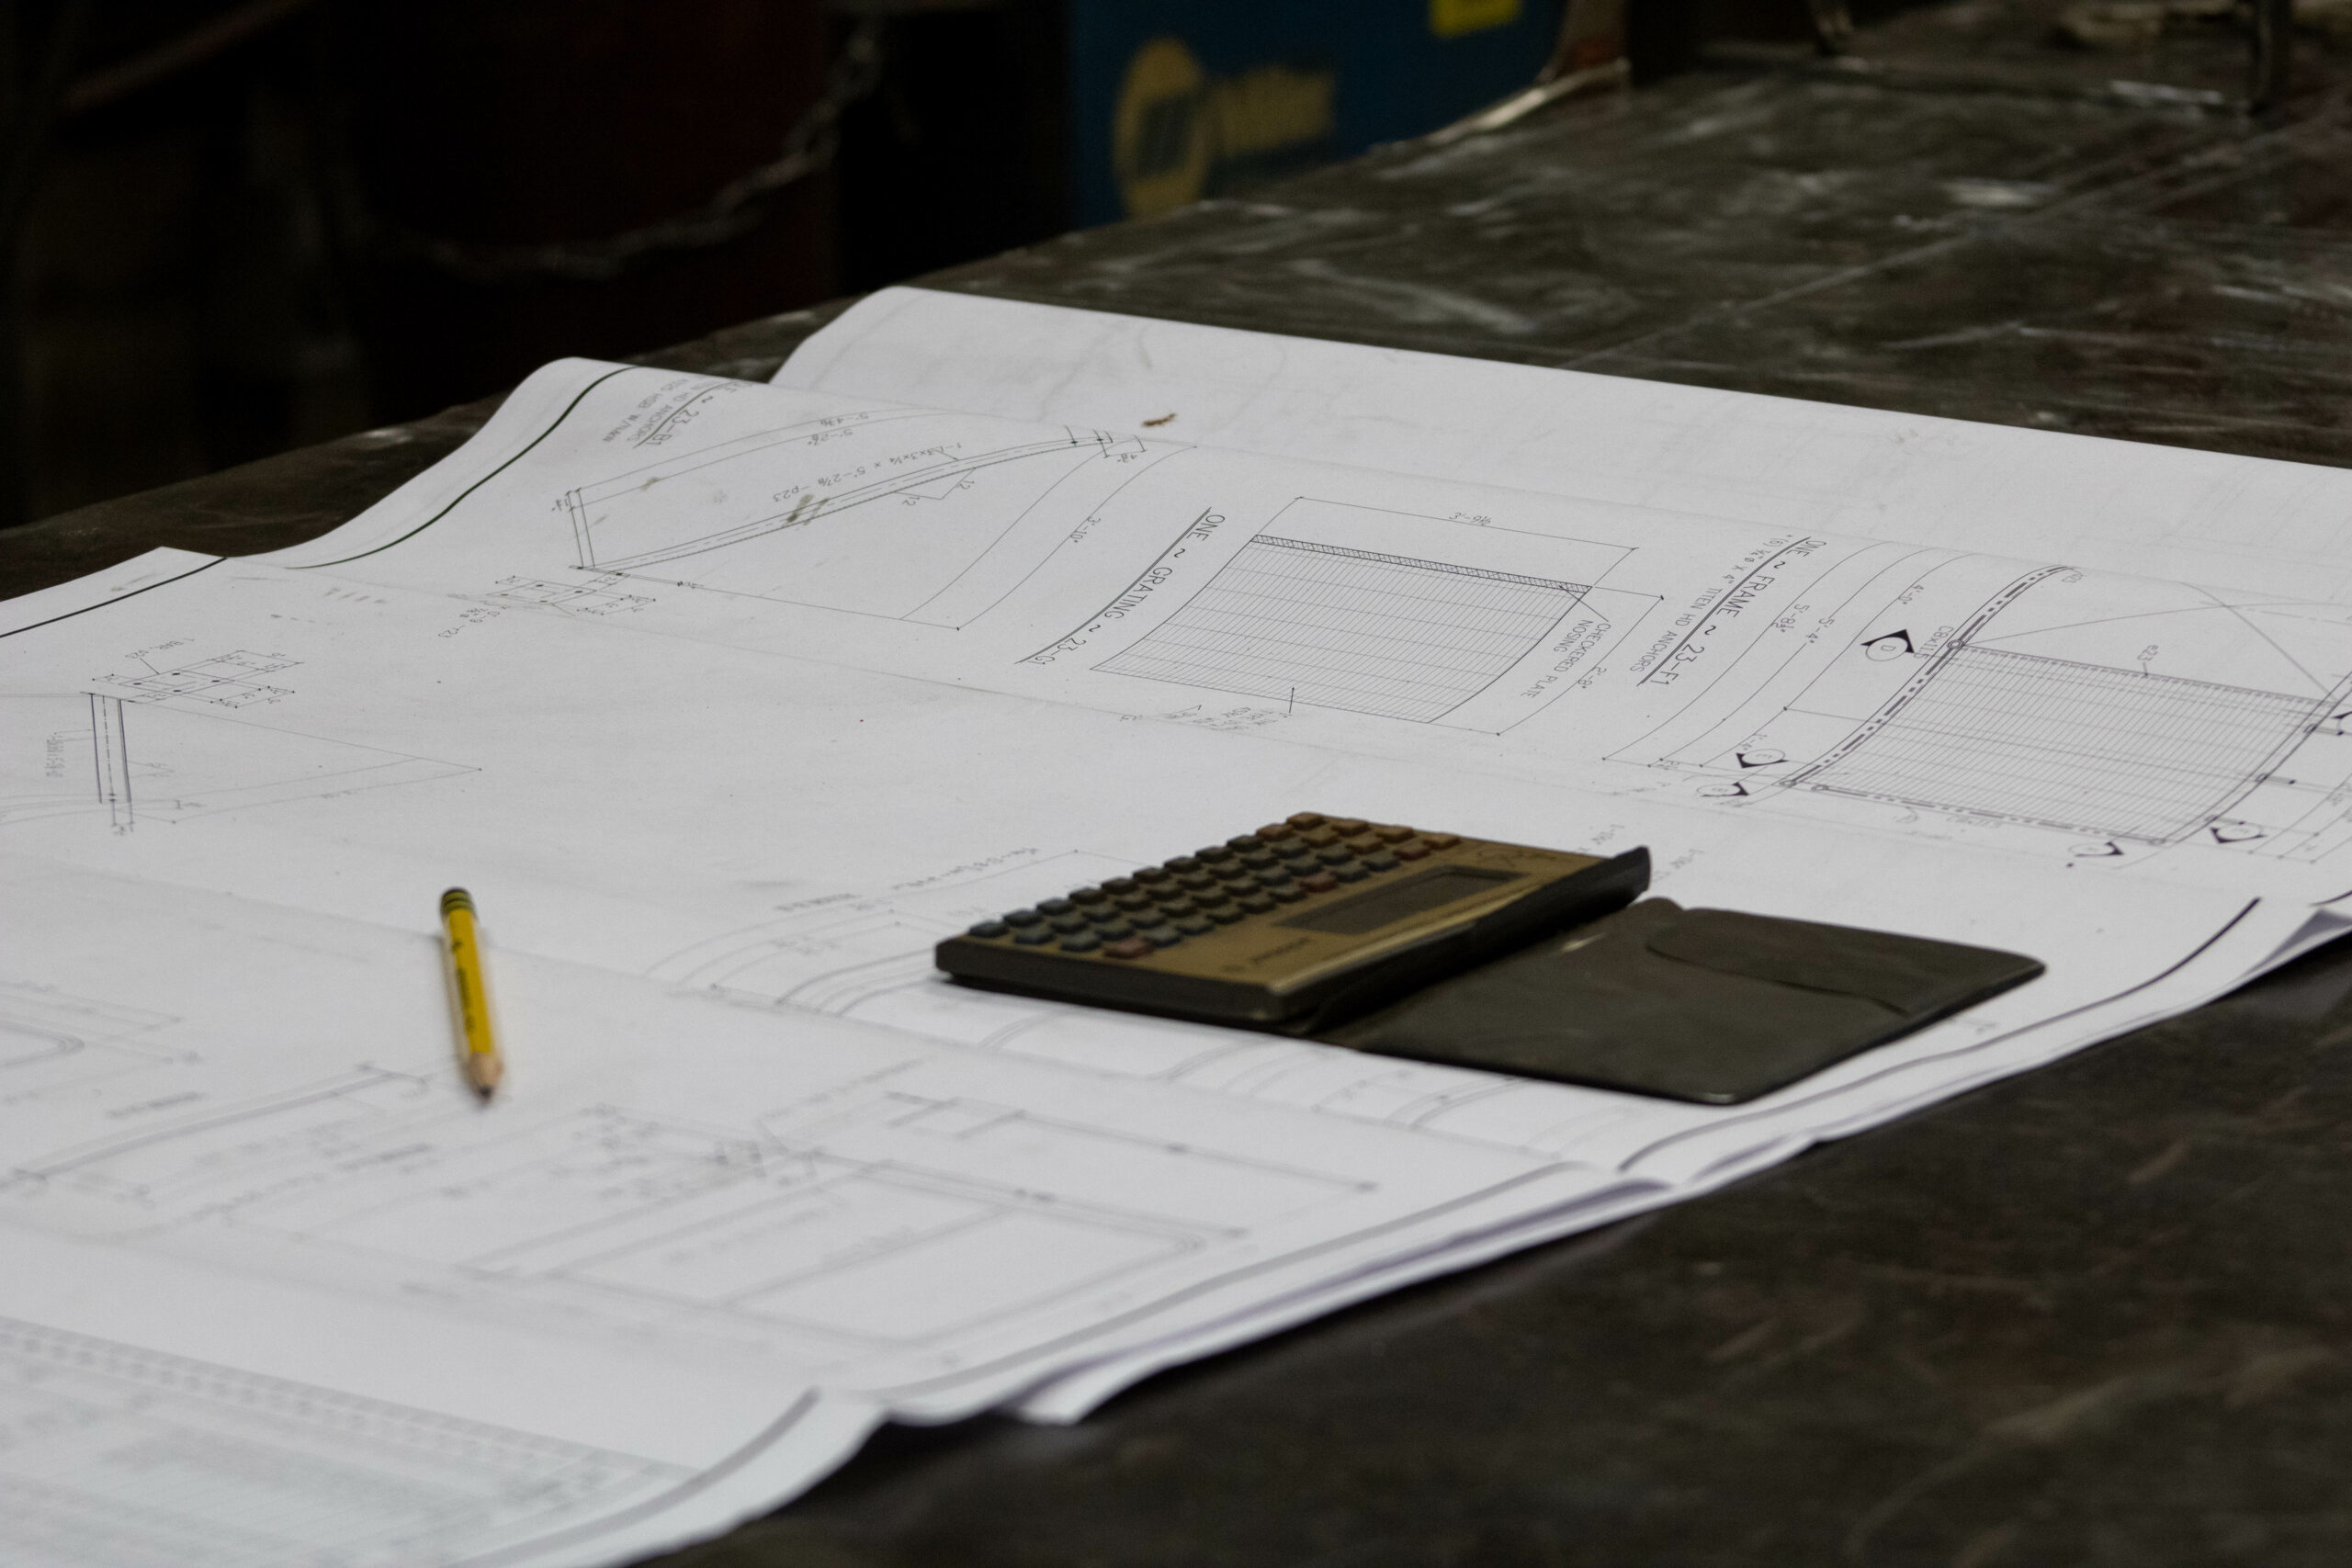 Shop drawings on a table with calculator and pencil